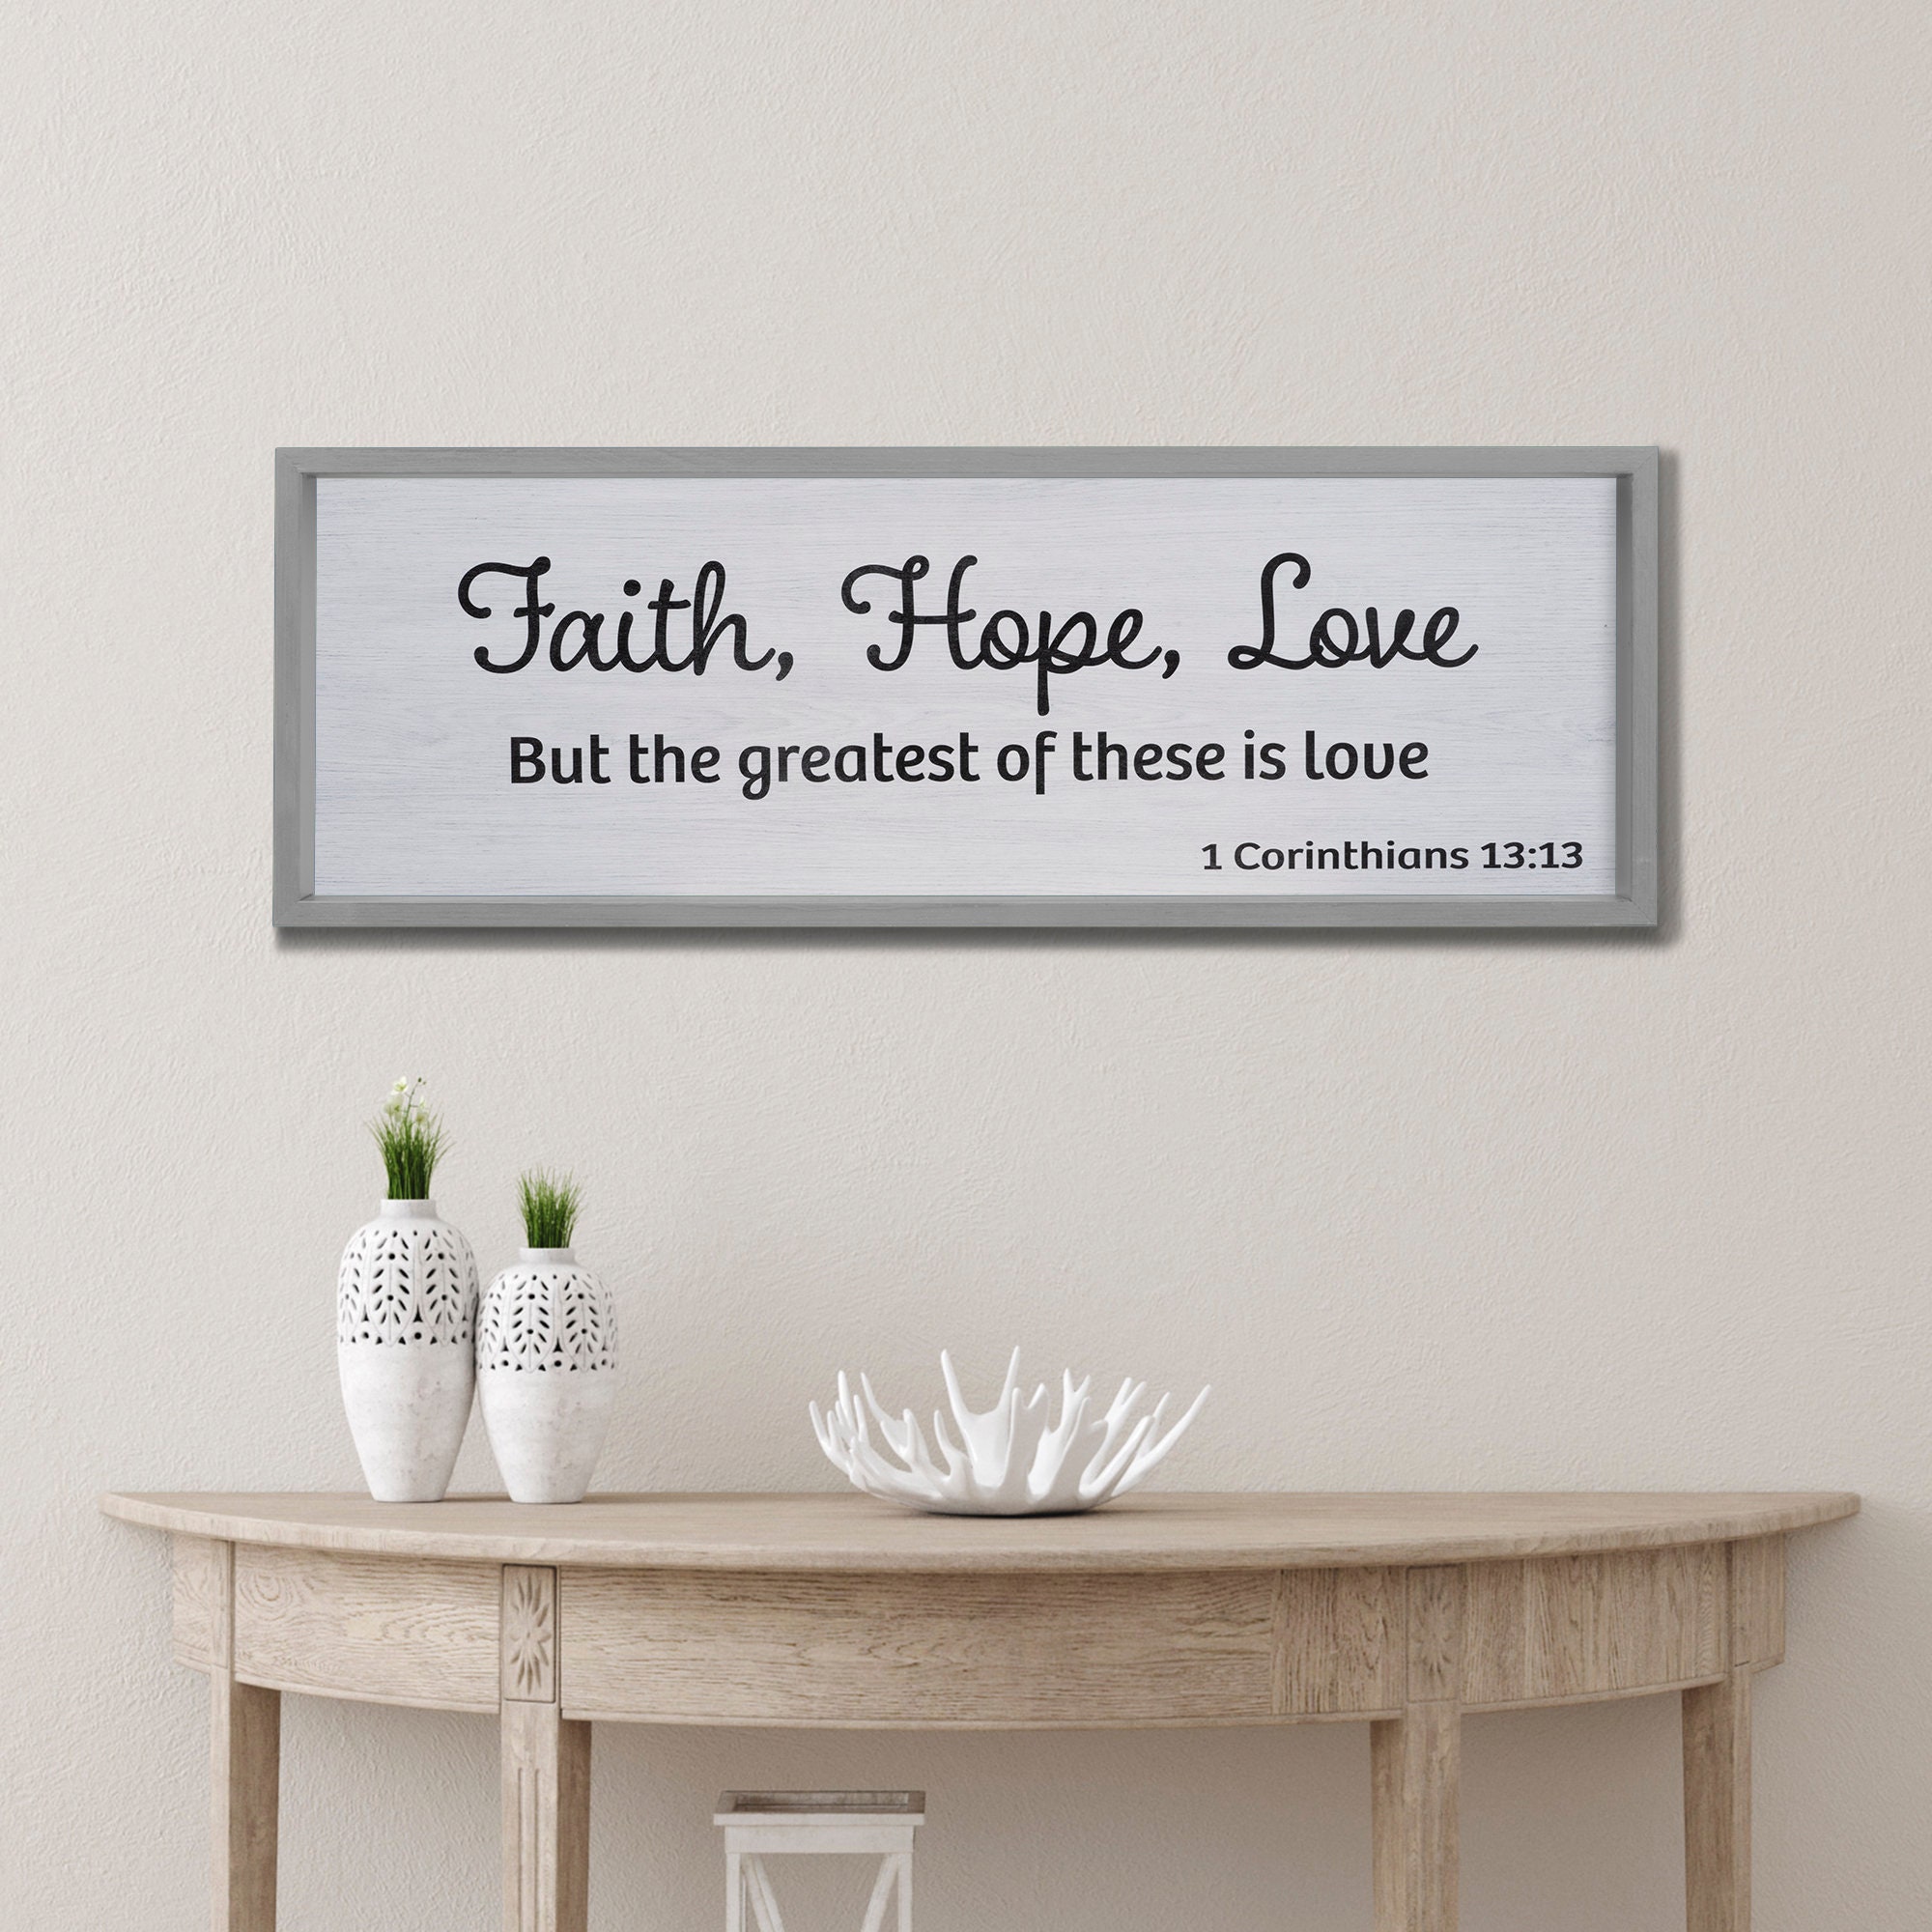 Home Accent JennyGems Faith Hope Love Dining Room Wall Hanging Handmade in USA Large 3 ft x 1 ft Framed Wood Sign